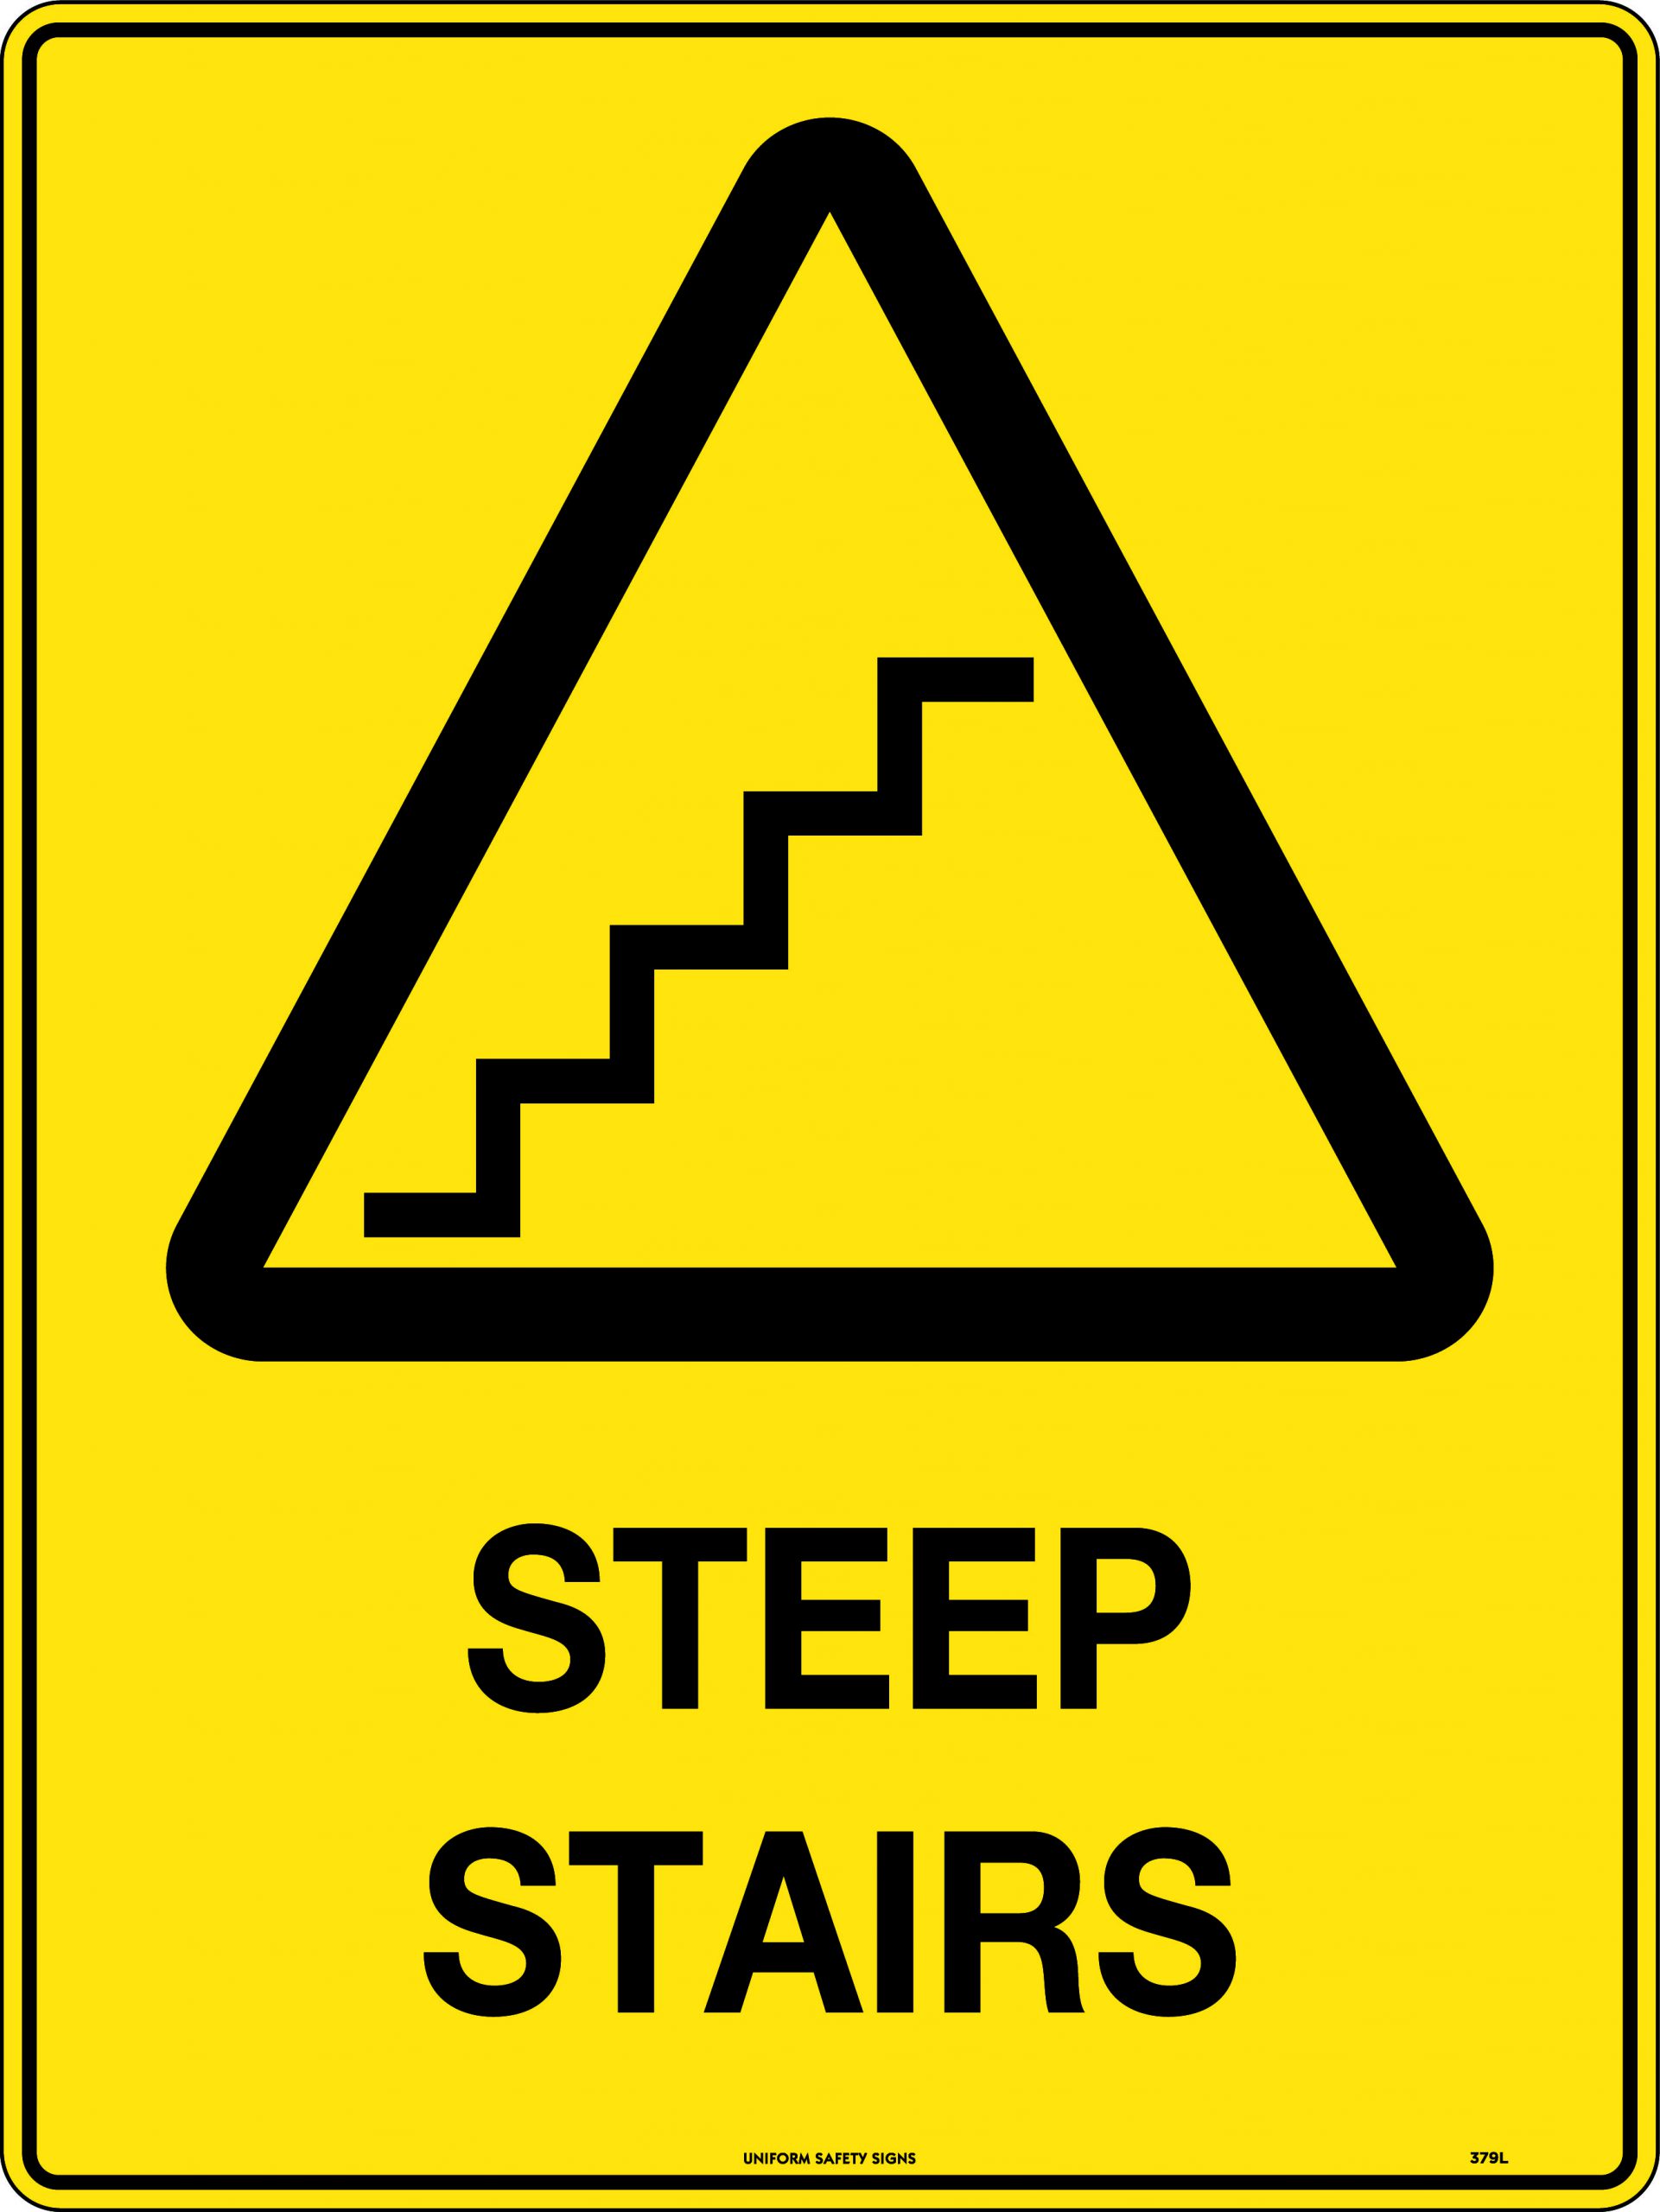 Caution Stairs Sign Meaning